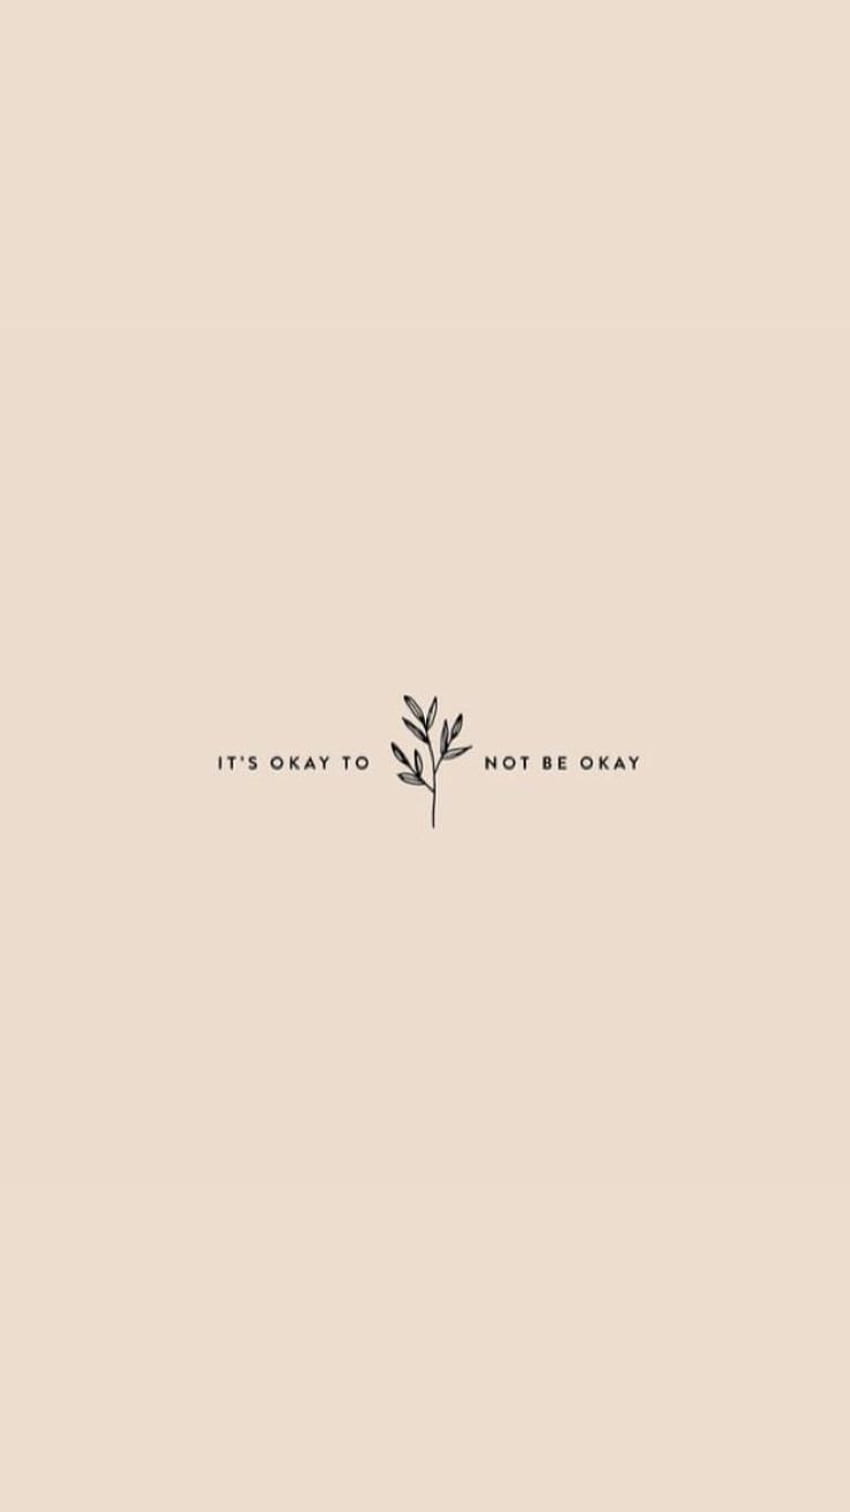 soft aesthetic . Short nature quotes, Quote aesthetic, Positive quotes, Simple Life HD phone wallpaper